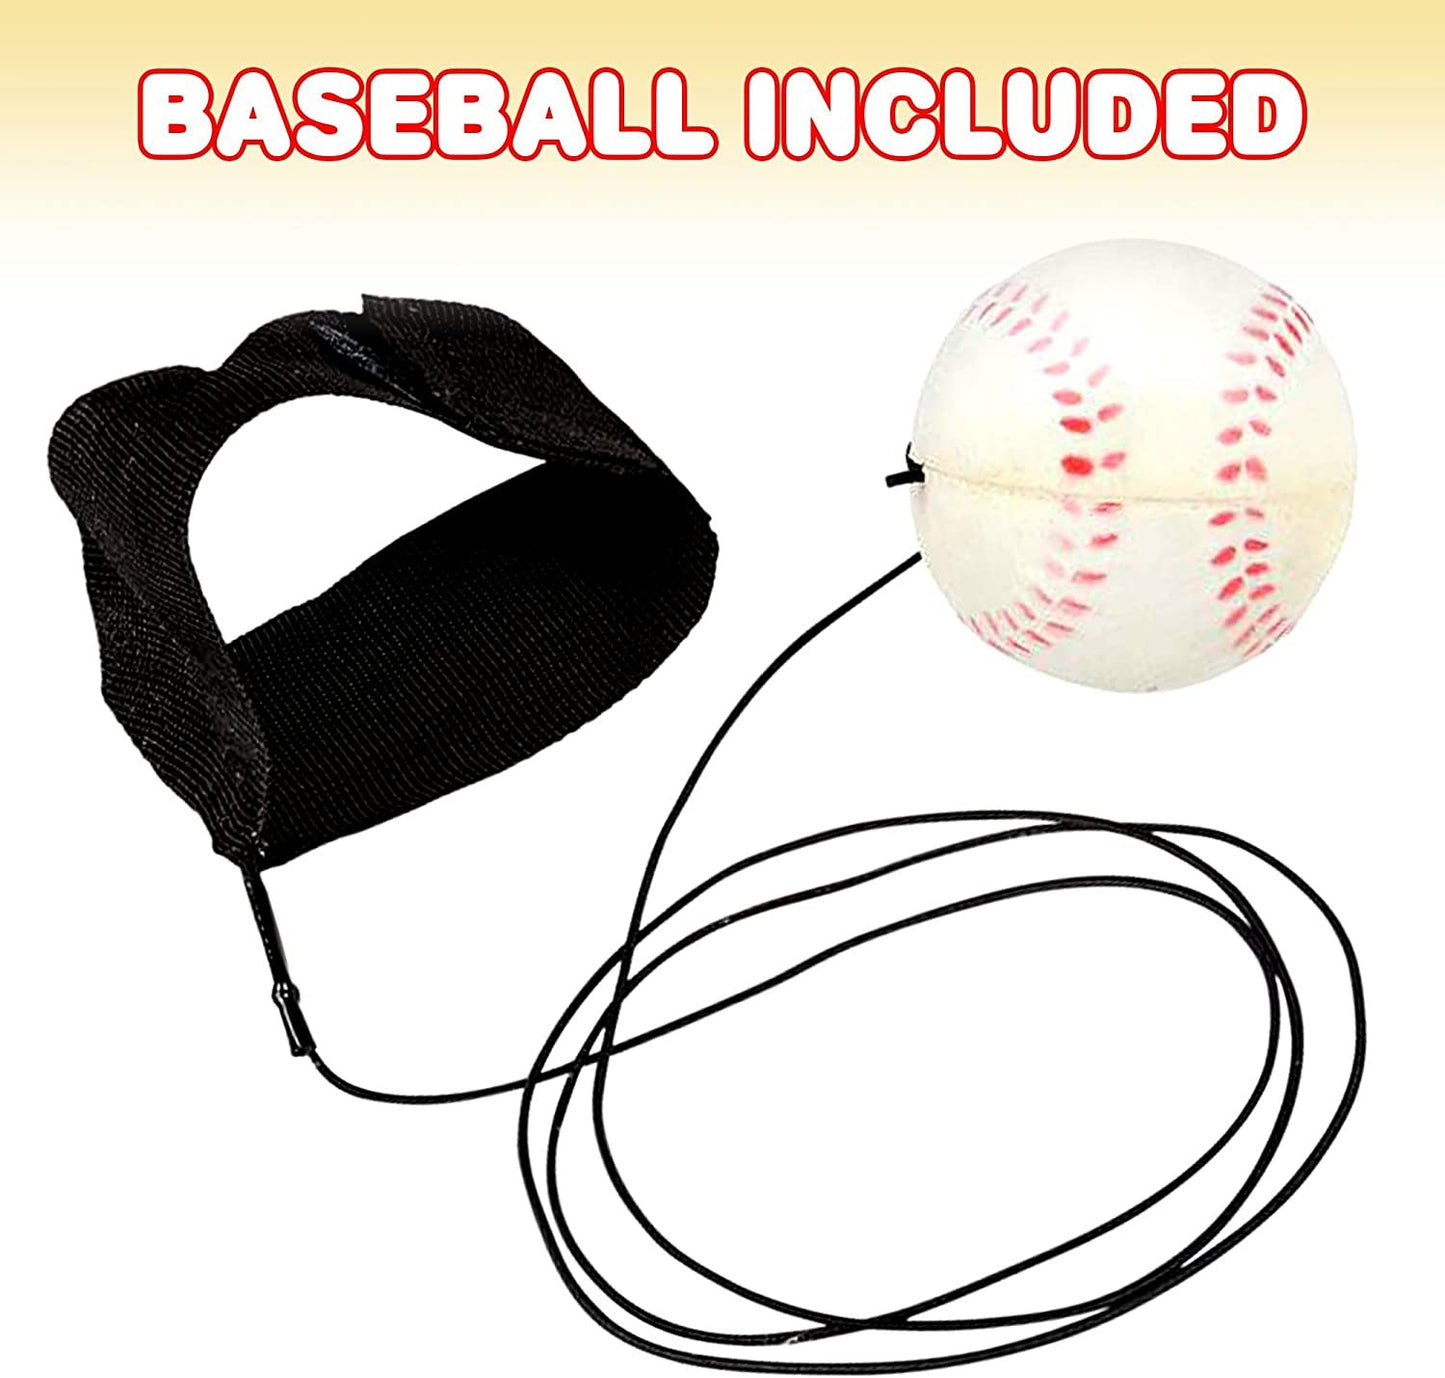 ArtCreativity 2.25 Inch Sports Wrist Balls - Set of 3 - Includes Basketball, Baseball, and Soccer Ball Wristband Toys - Durable Foam String Attached Rebound Balls - Party Favor, Gift Idea for Kids